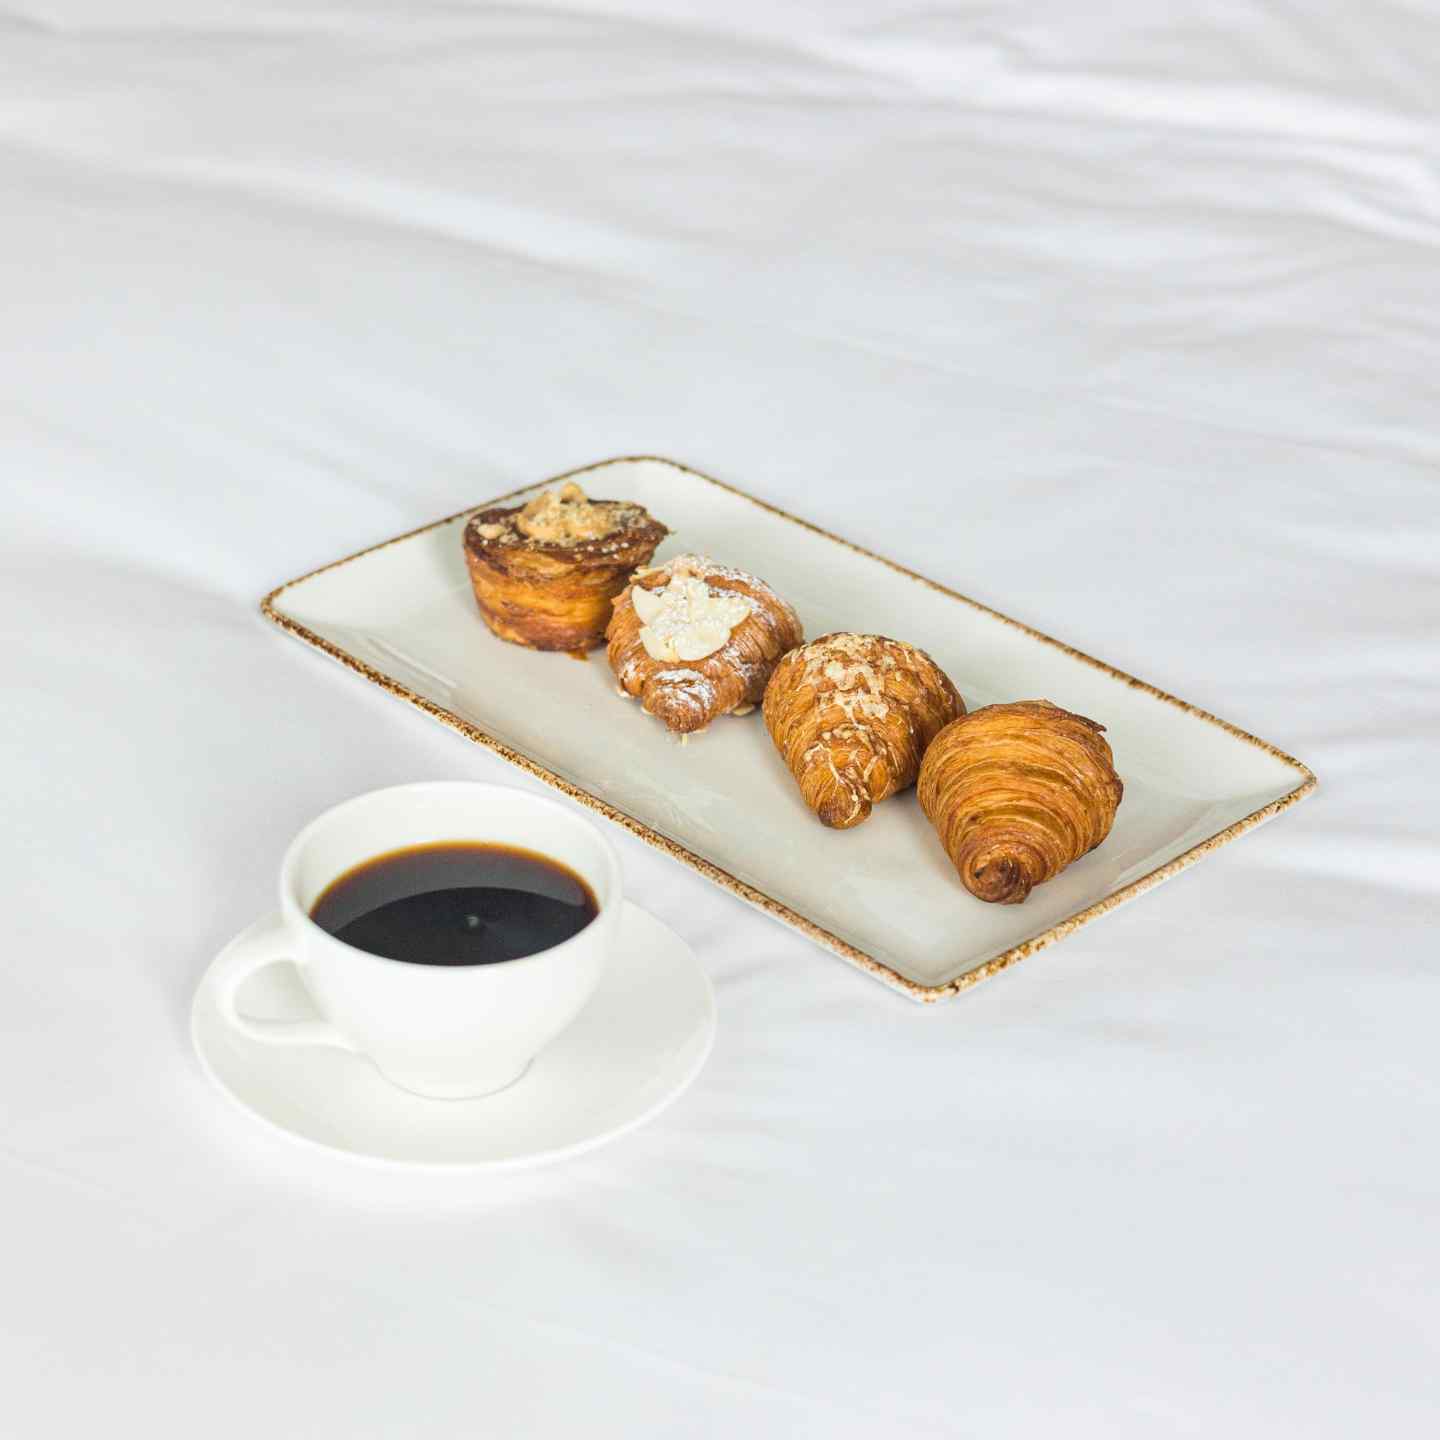 Small cup of coffee in white coffee cup and four croissants on a rectangular plate sitting on a white bed